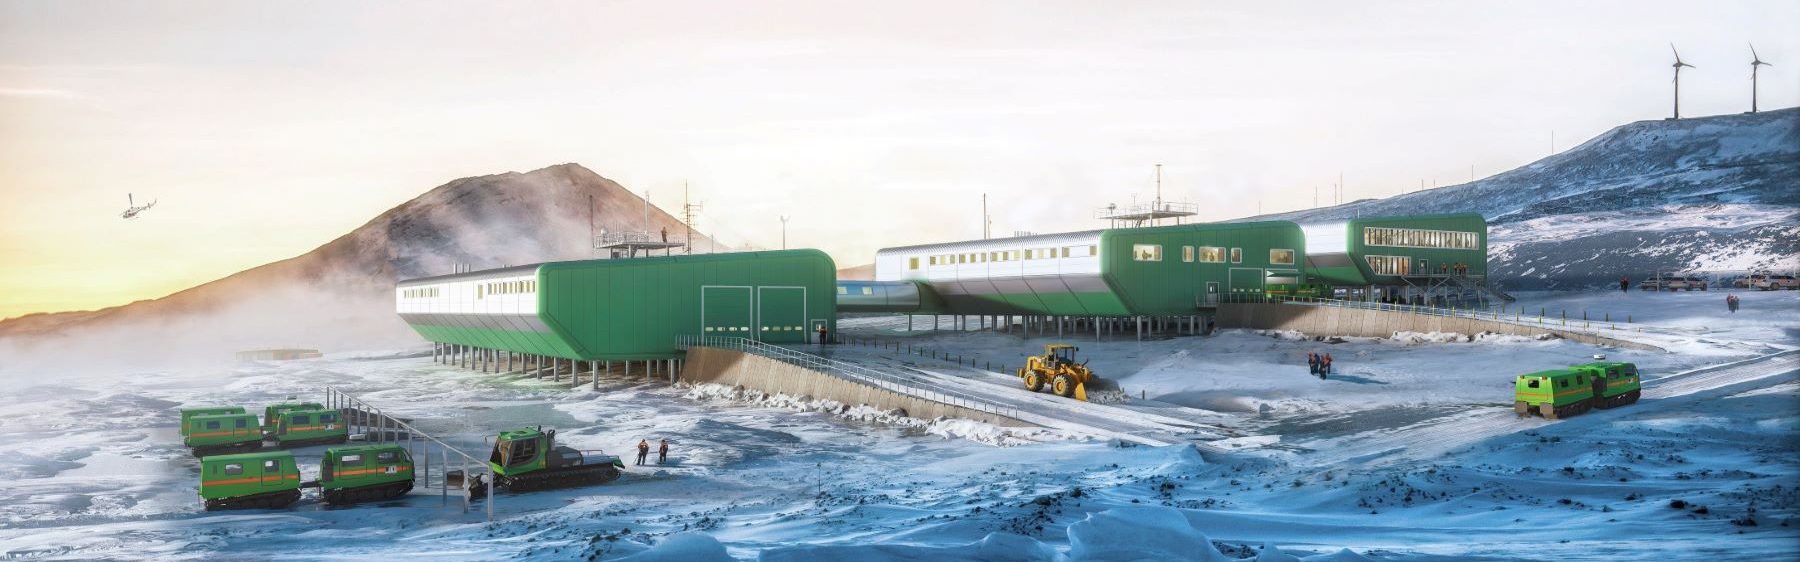  Building on ice: complex consent leaves Antarctica project hanging in the balance